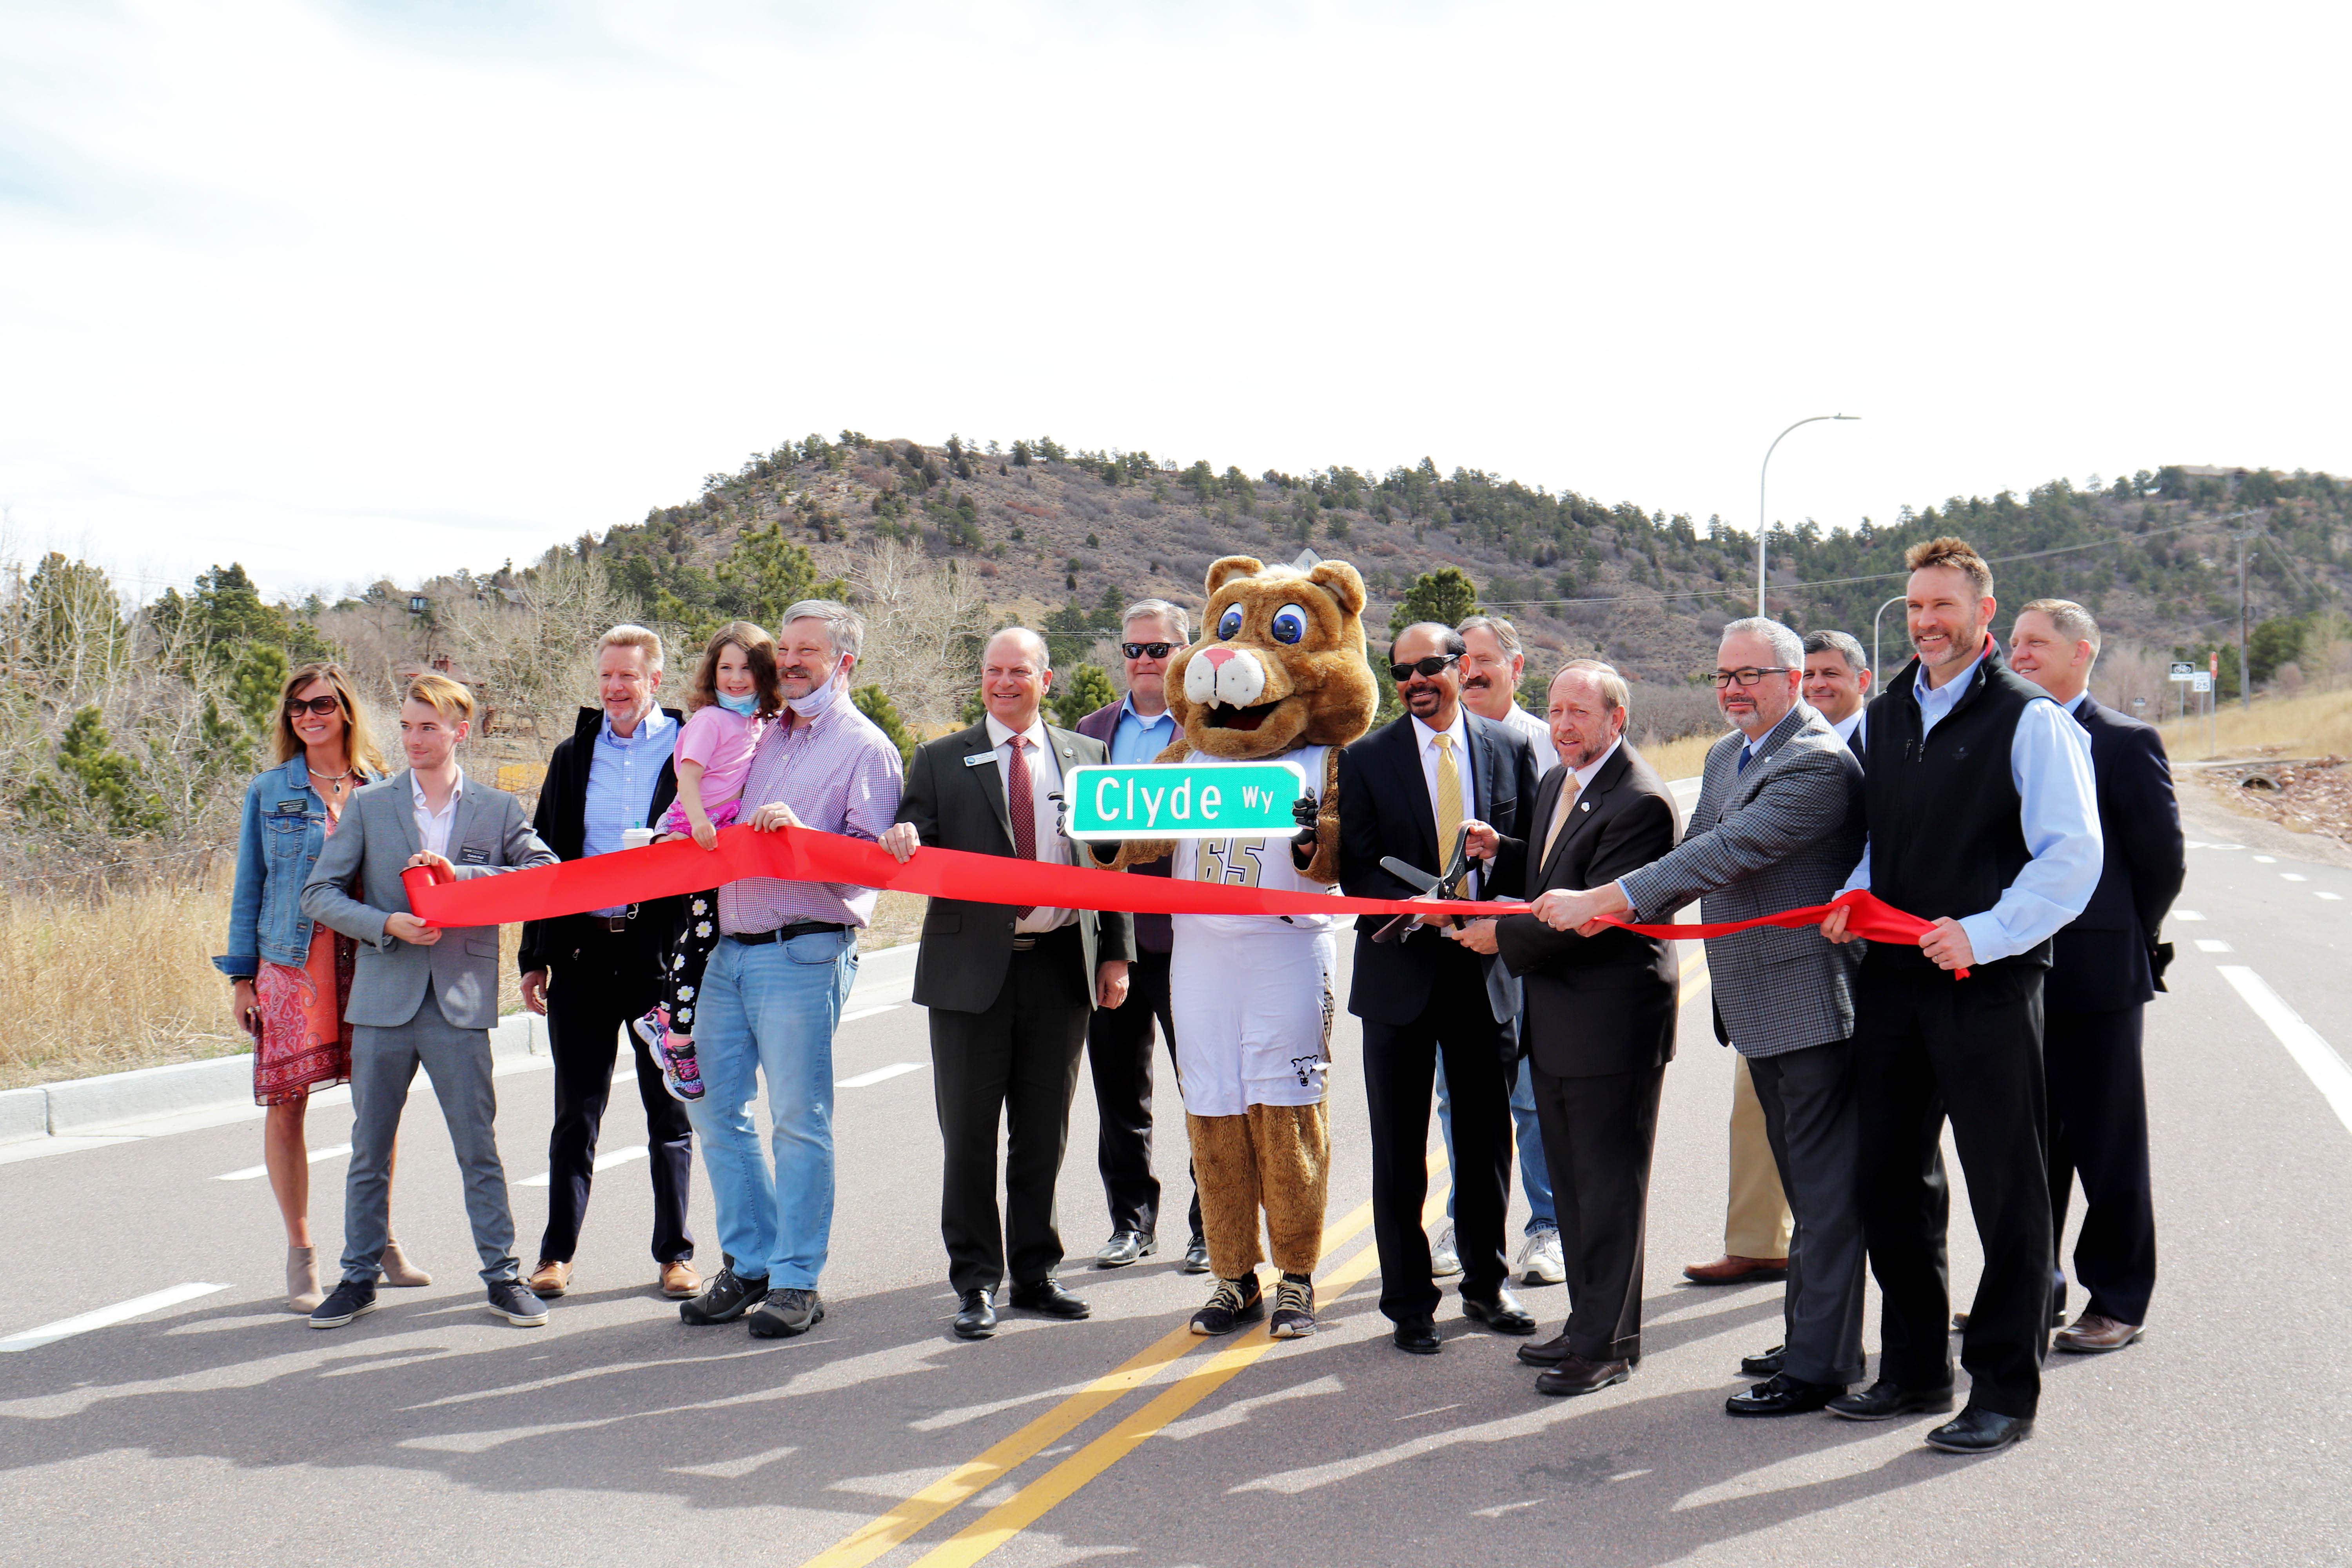 Campus and City of Colorado Springs leaders came together to celebrate the official ribbon-cutting of Clyde Way